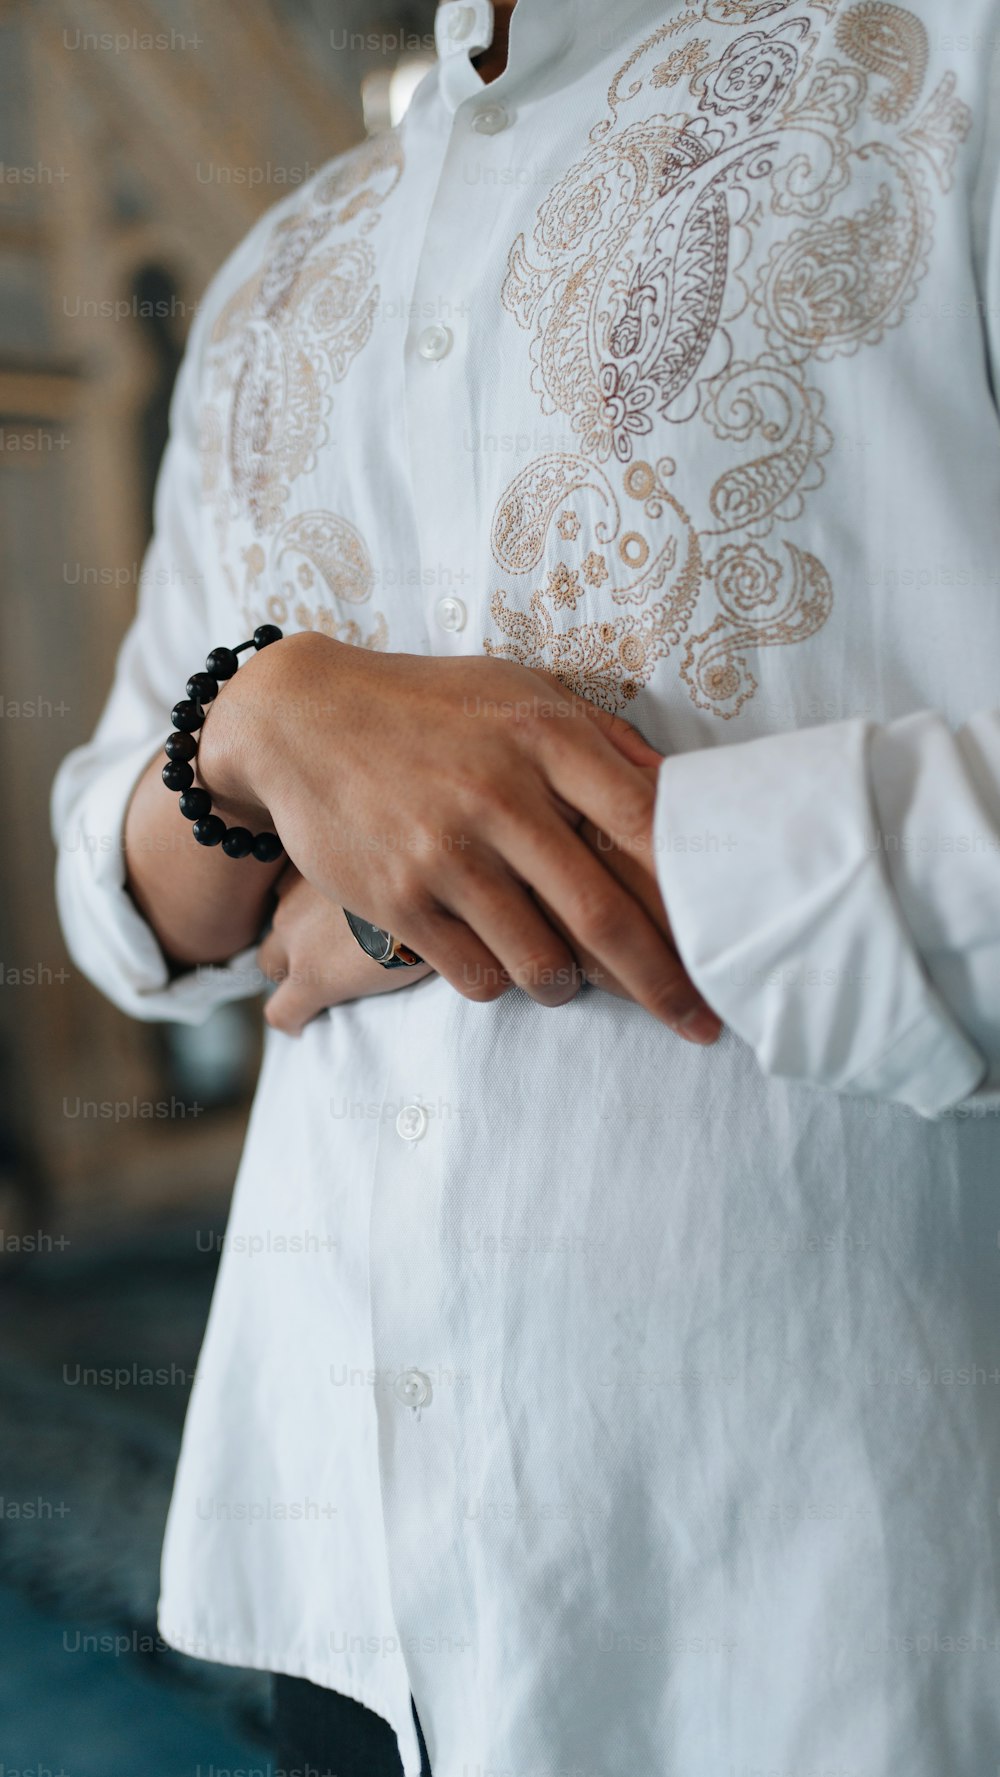 a person wearing a white shirt and a beaded bracelet